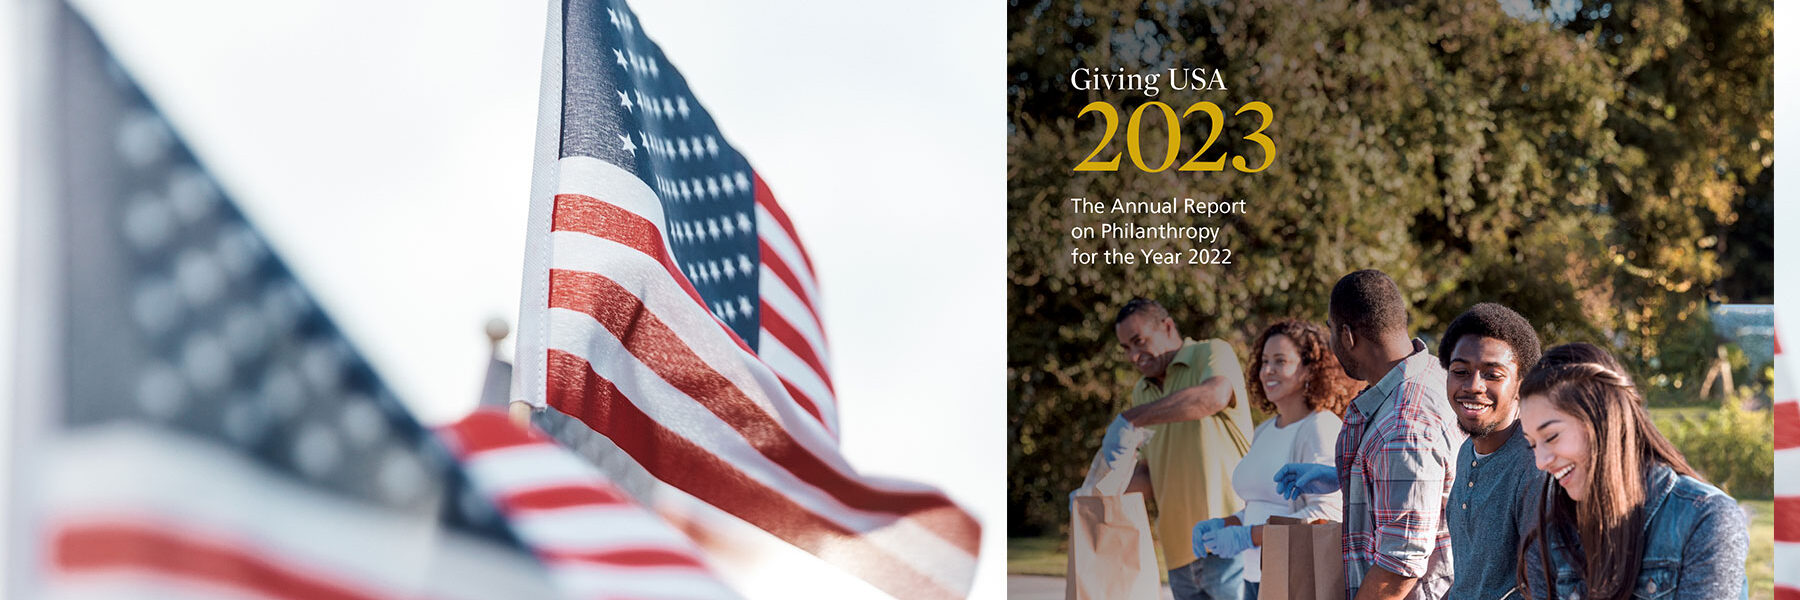 Giving USA 2023 Report Insights